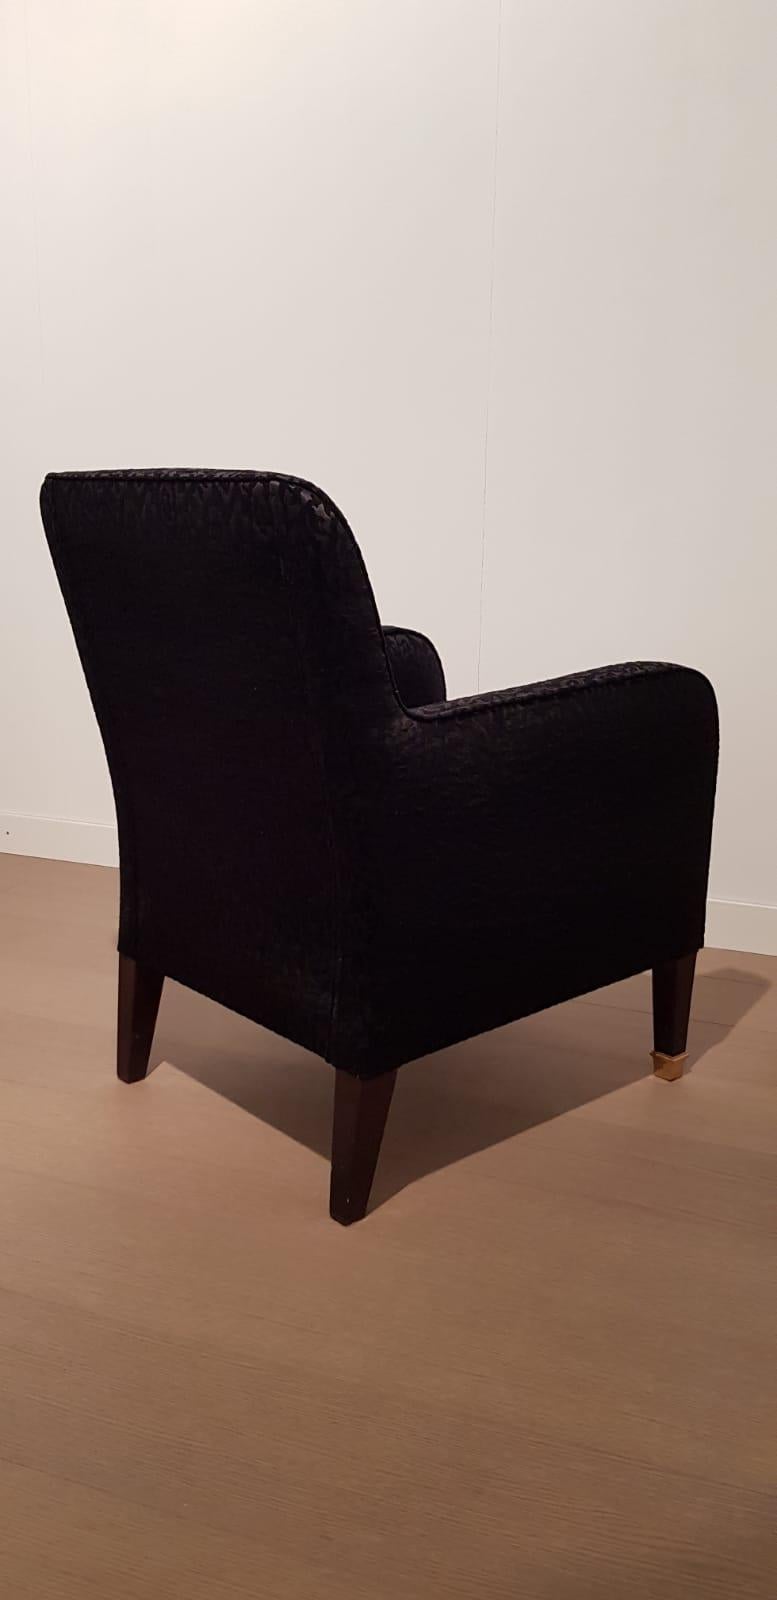 Late 20th Century armchair contemporary classic armchair Design by Anna Gili Milan Made in Italy For Sale